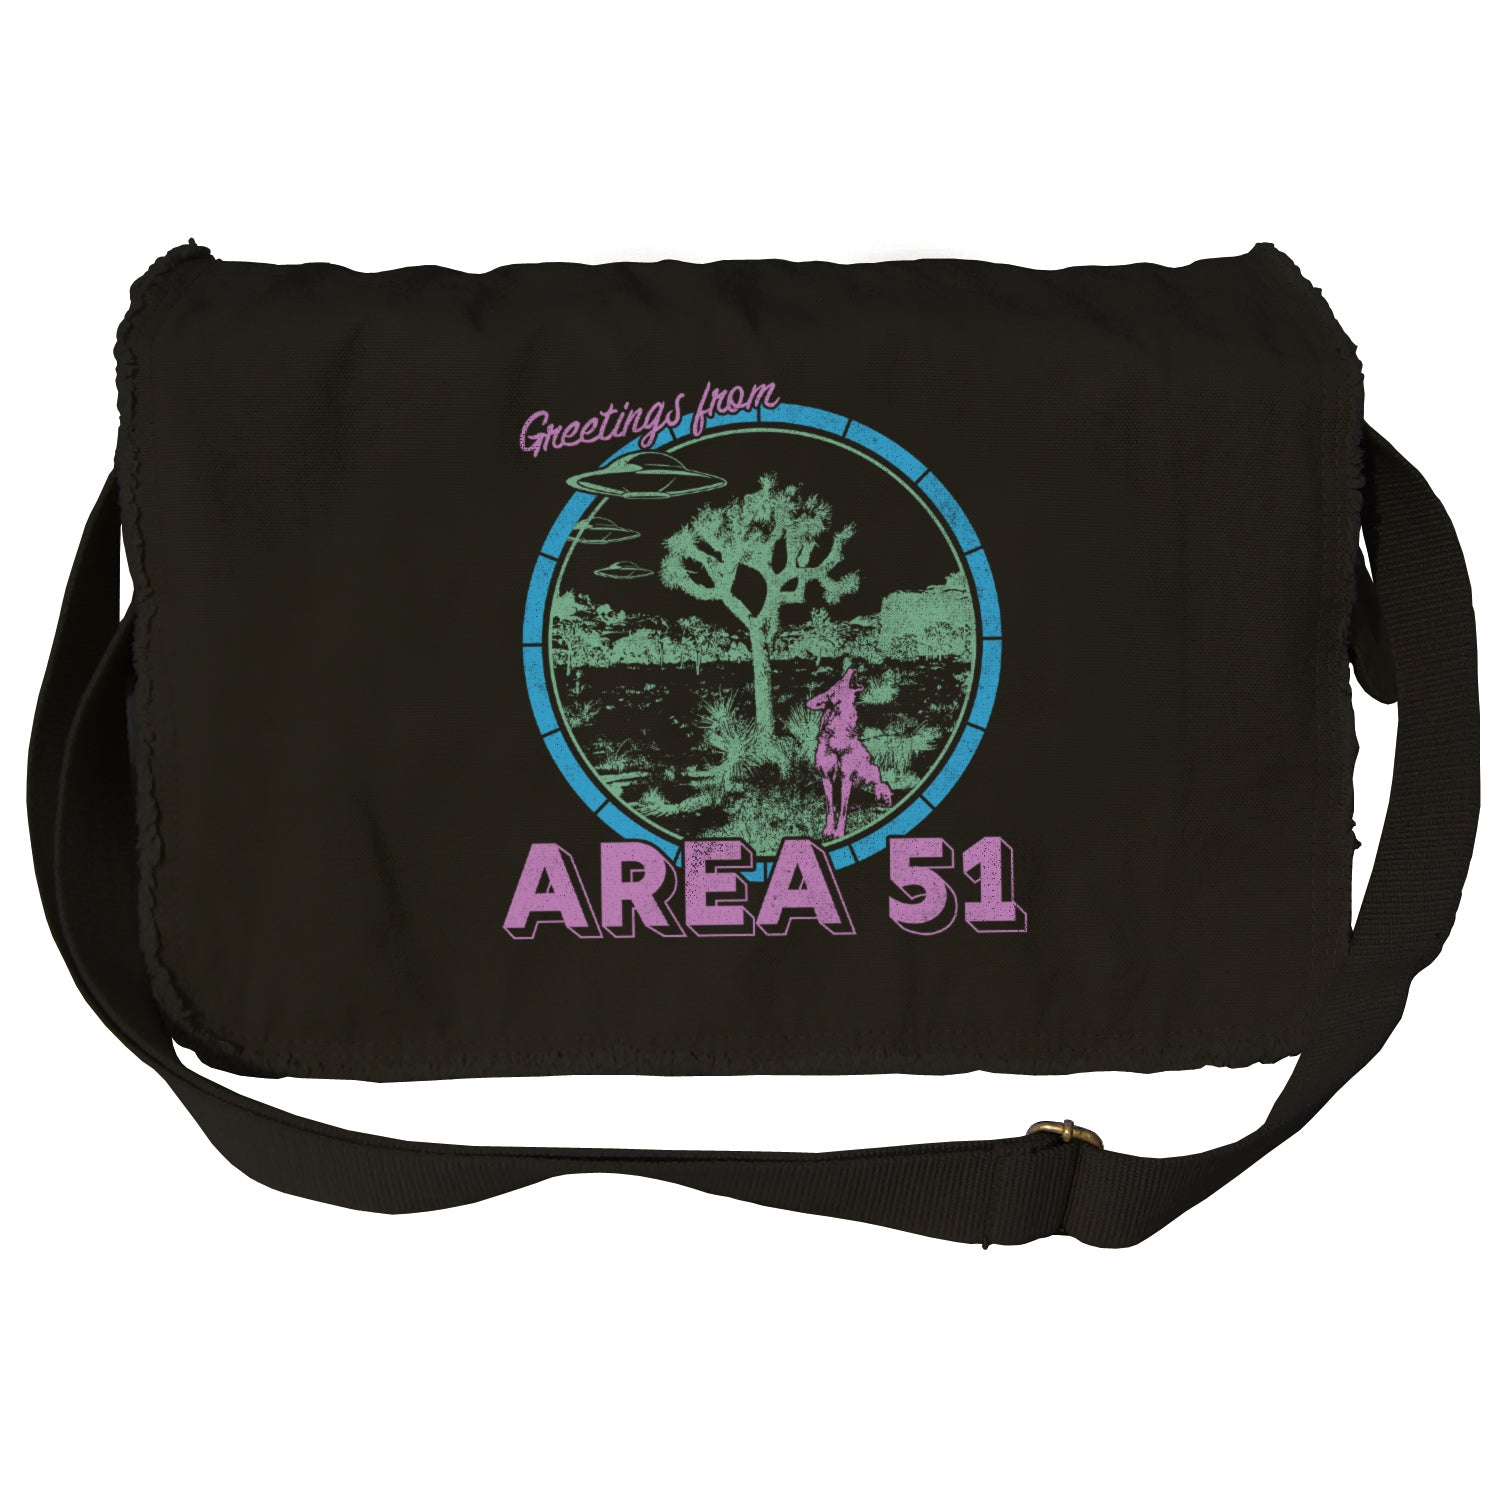 Greetings from Area 51 Messenger Bag